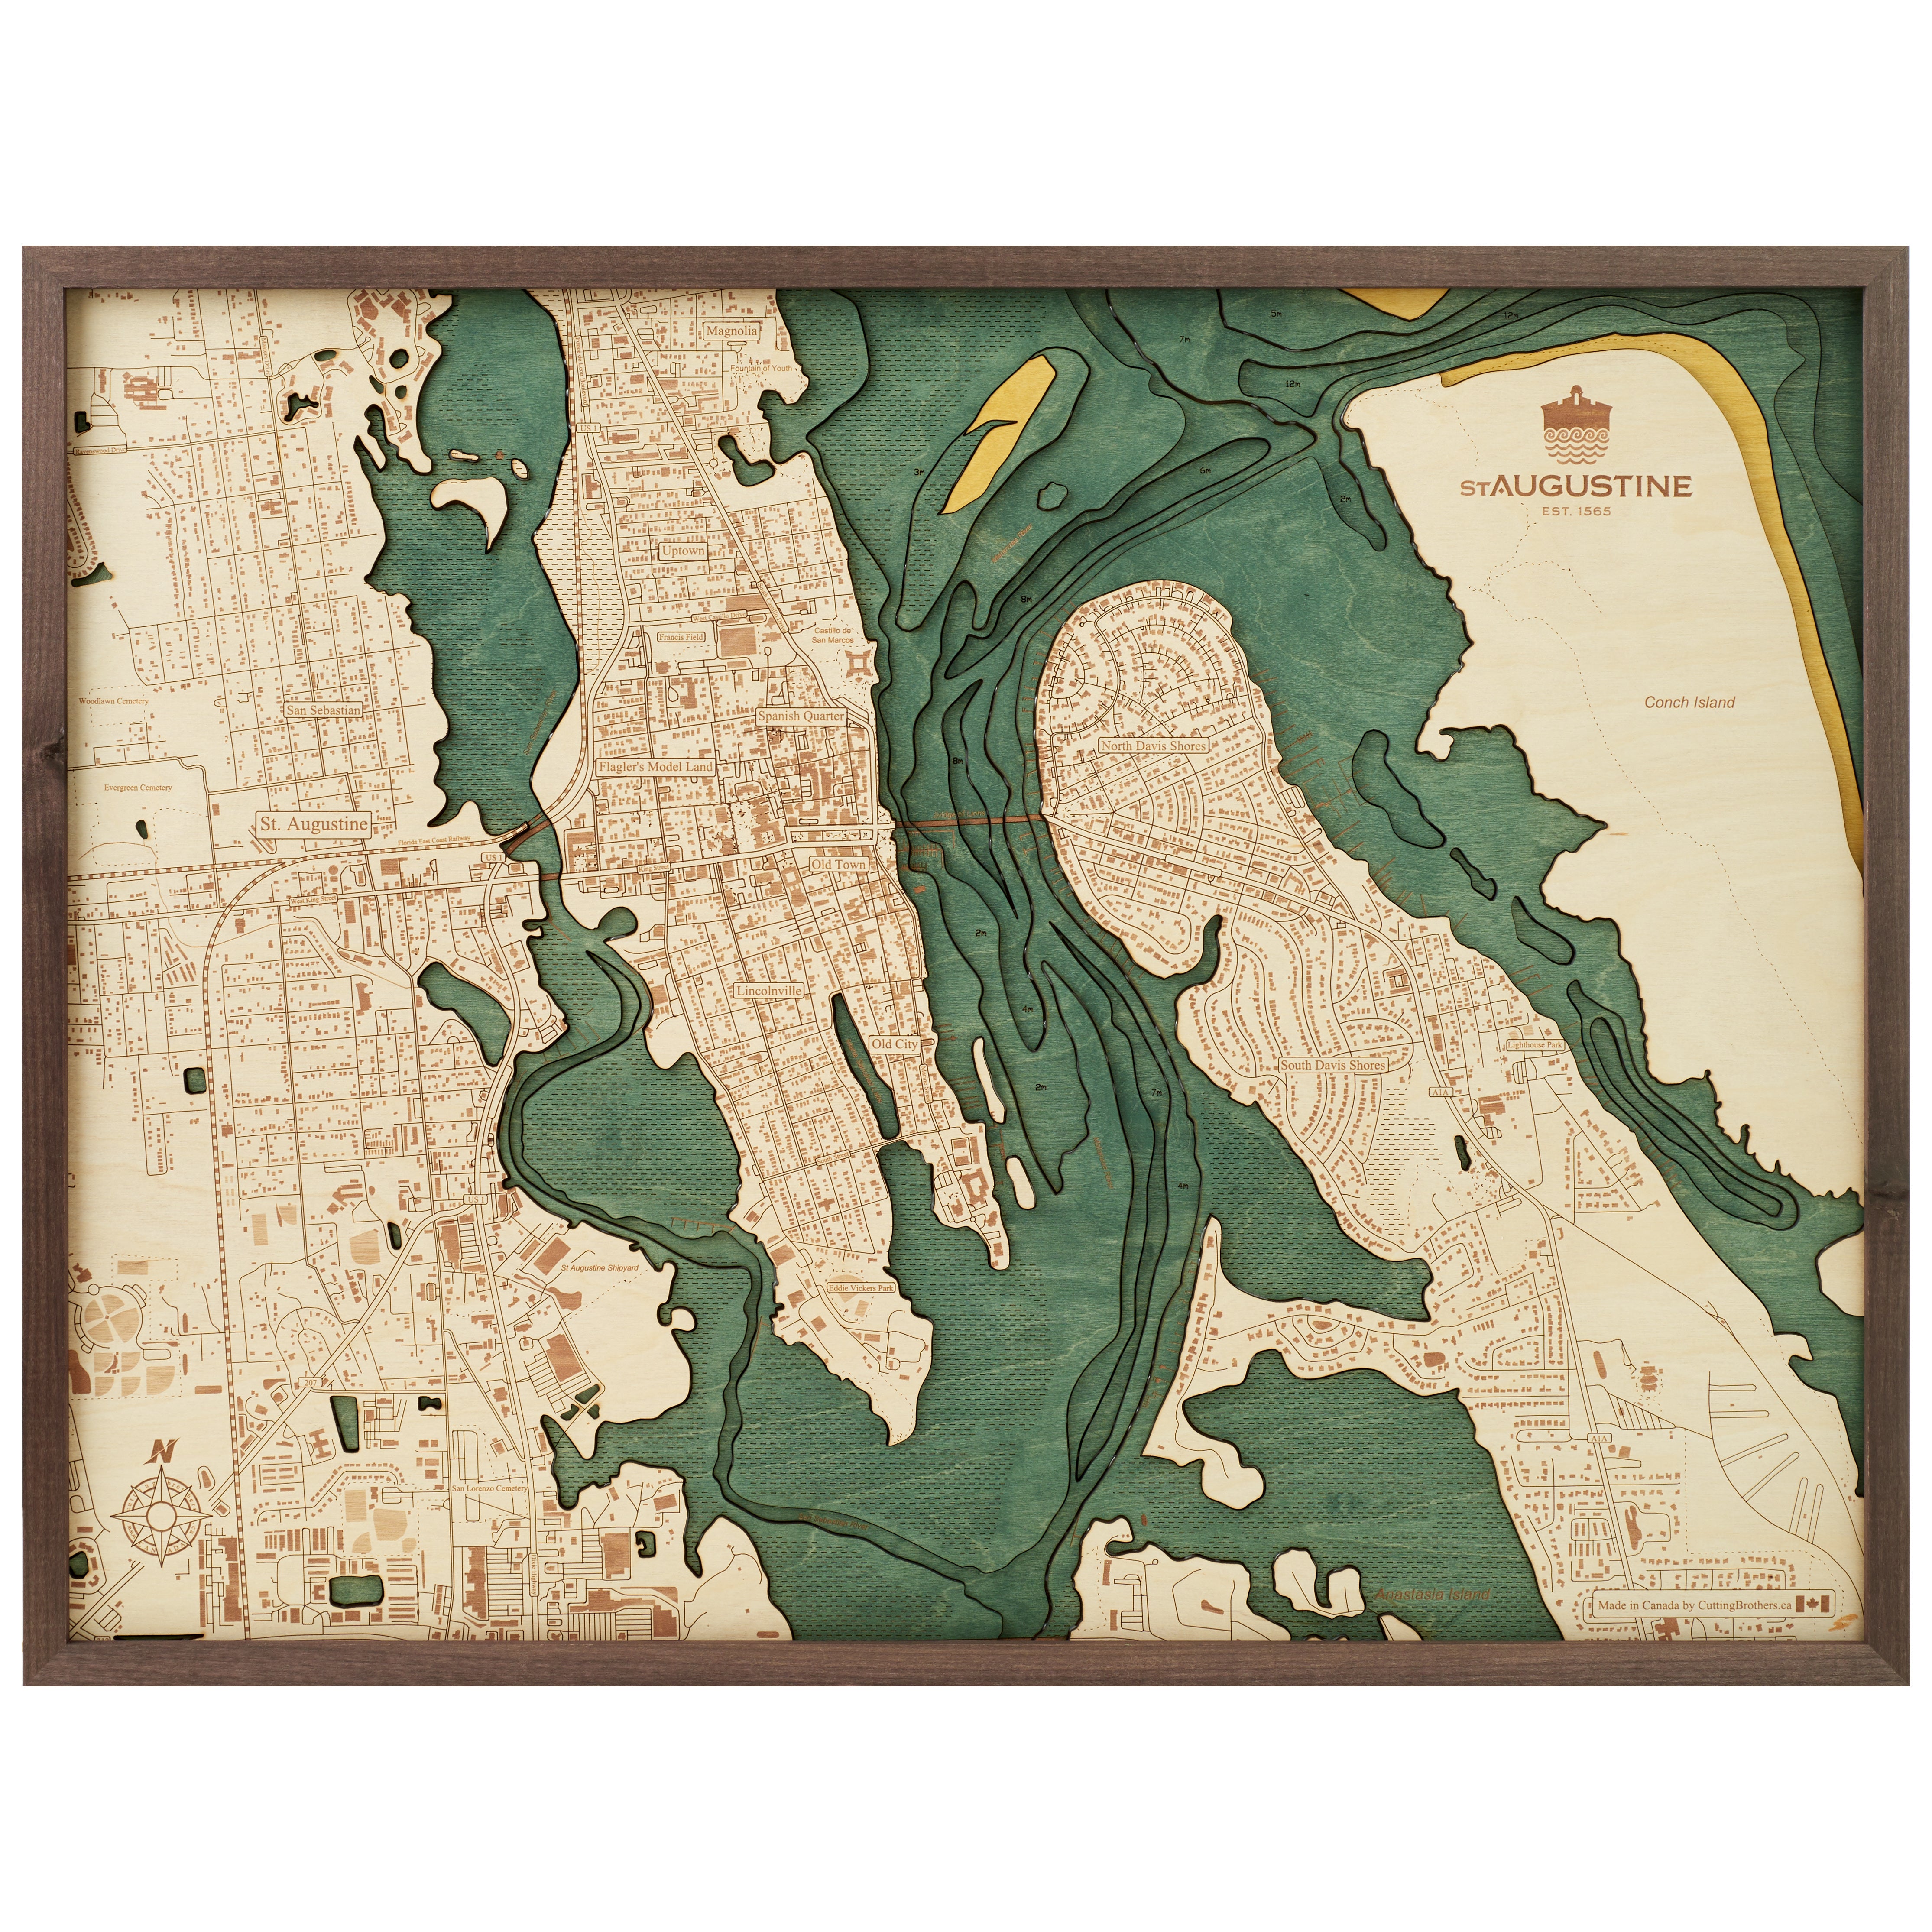 ST AUGUSTINE 3D WOODEN WALL MAP - Version L